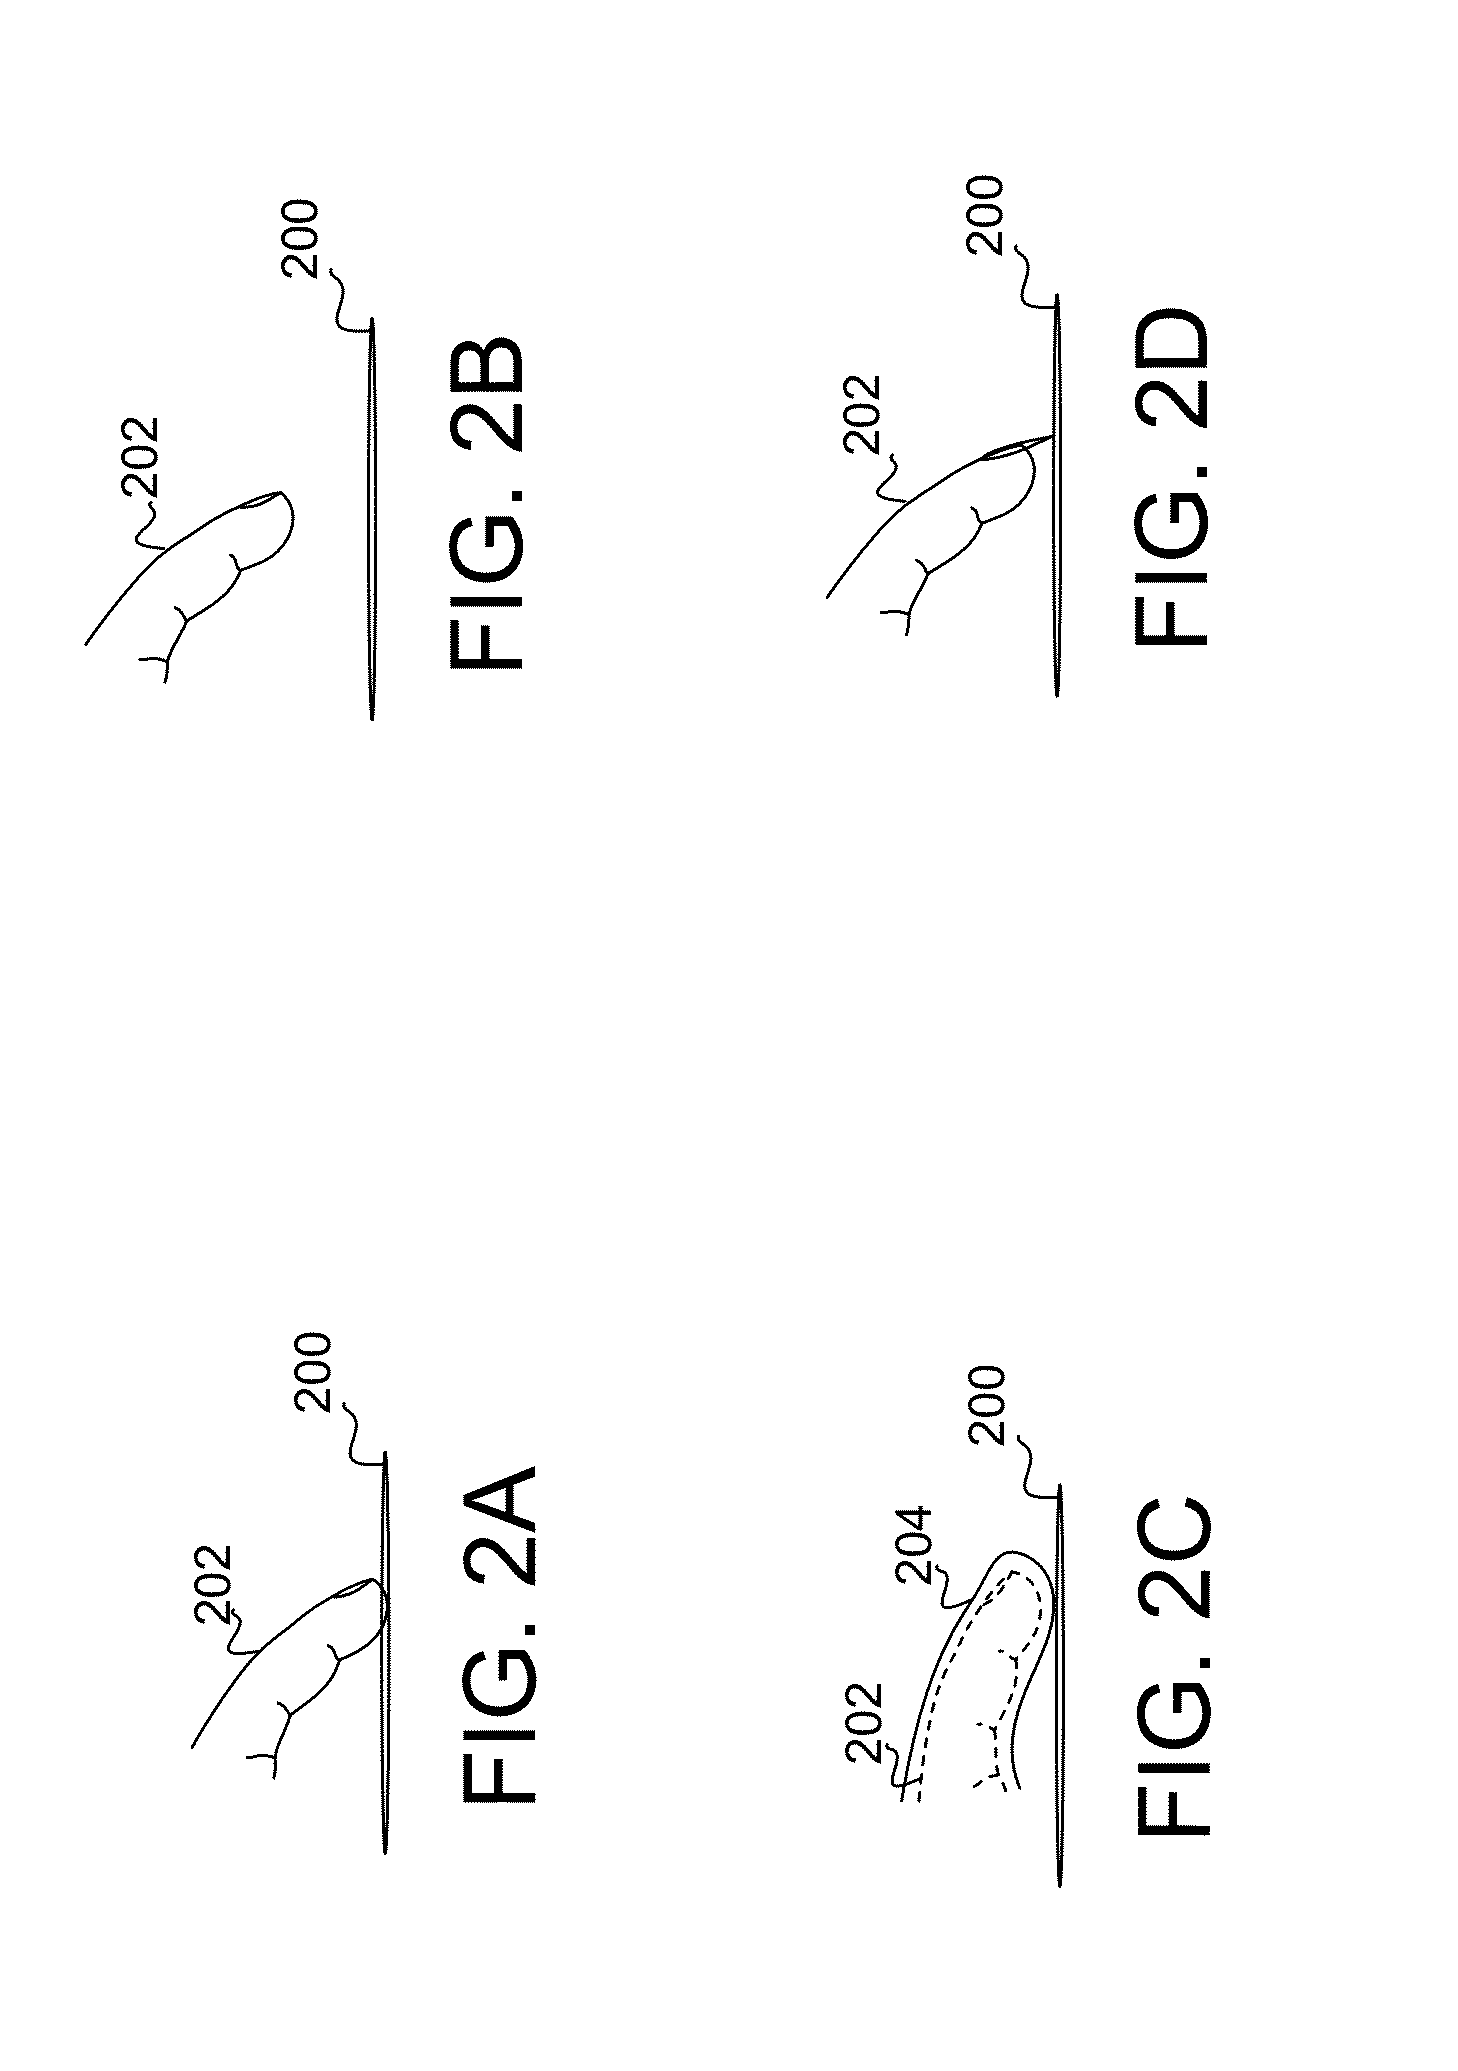 Systems and methods for determining types of user input